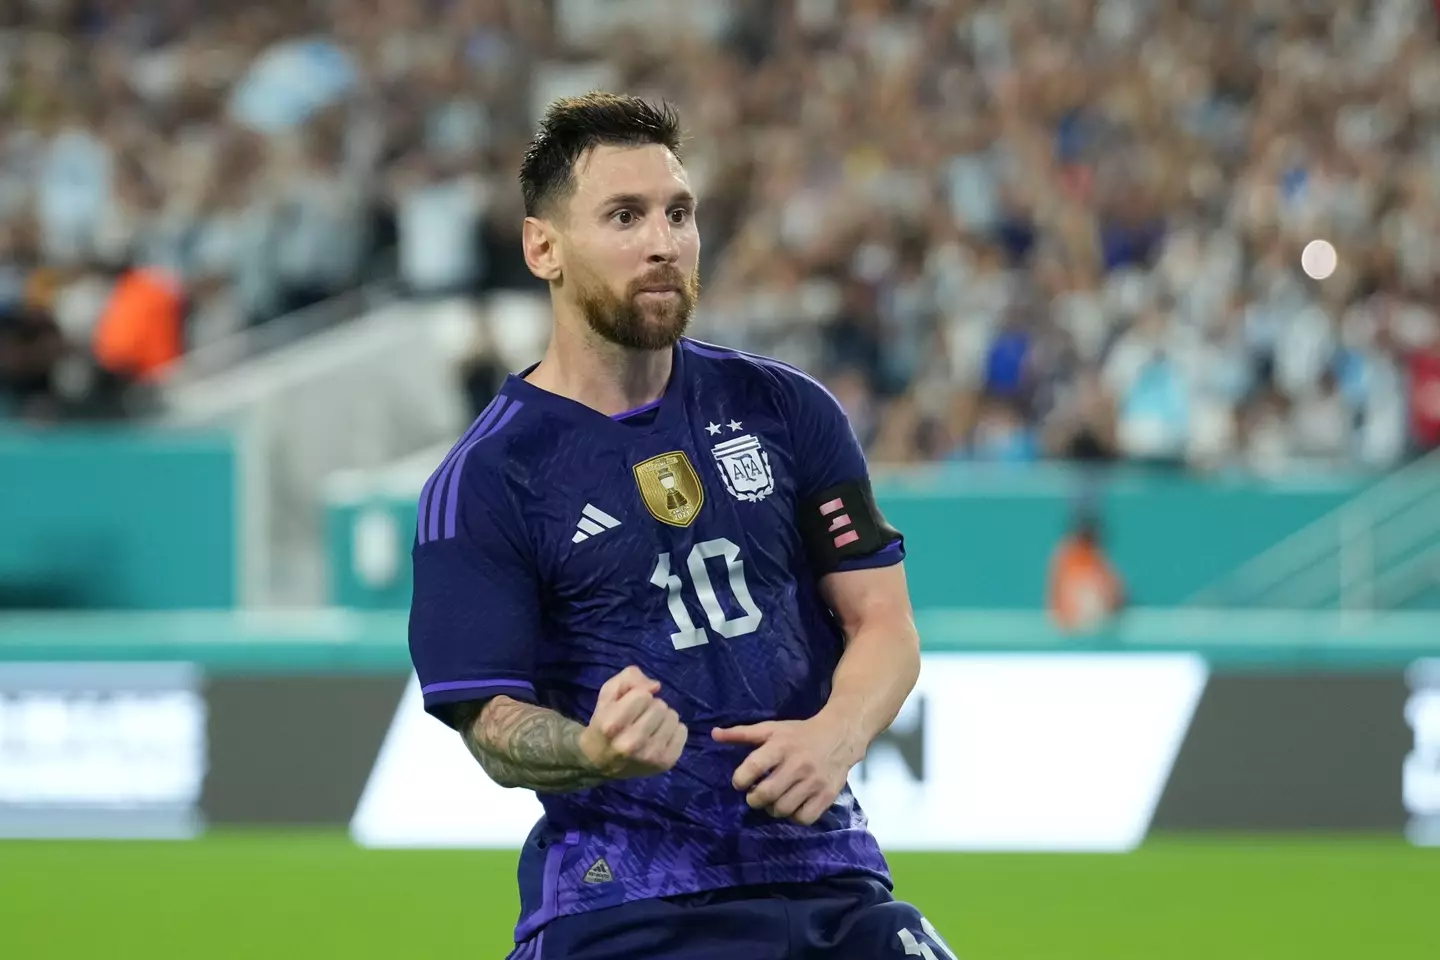 Messi has confirmed this year's World Cup will be his last. (Image